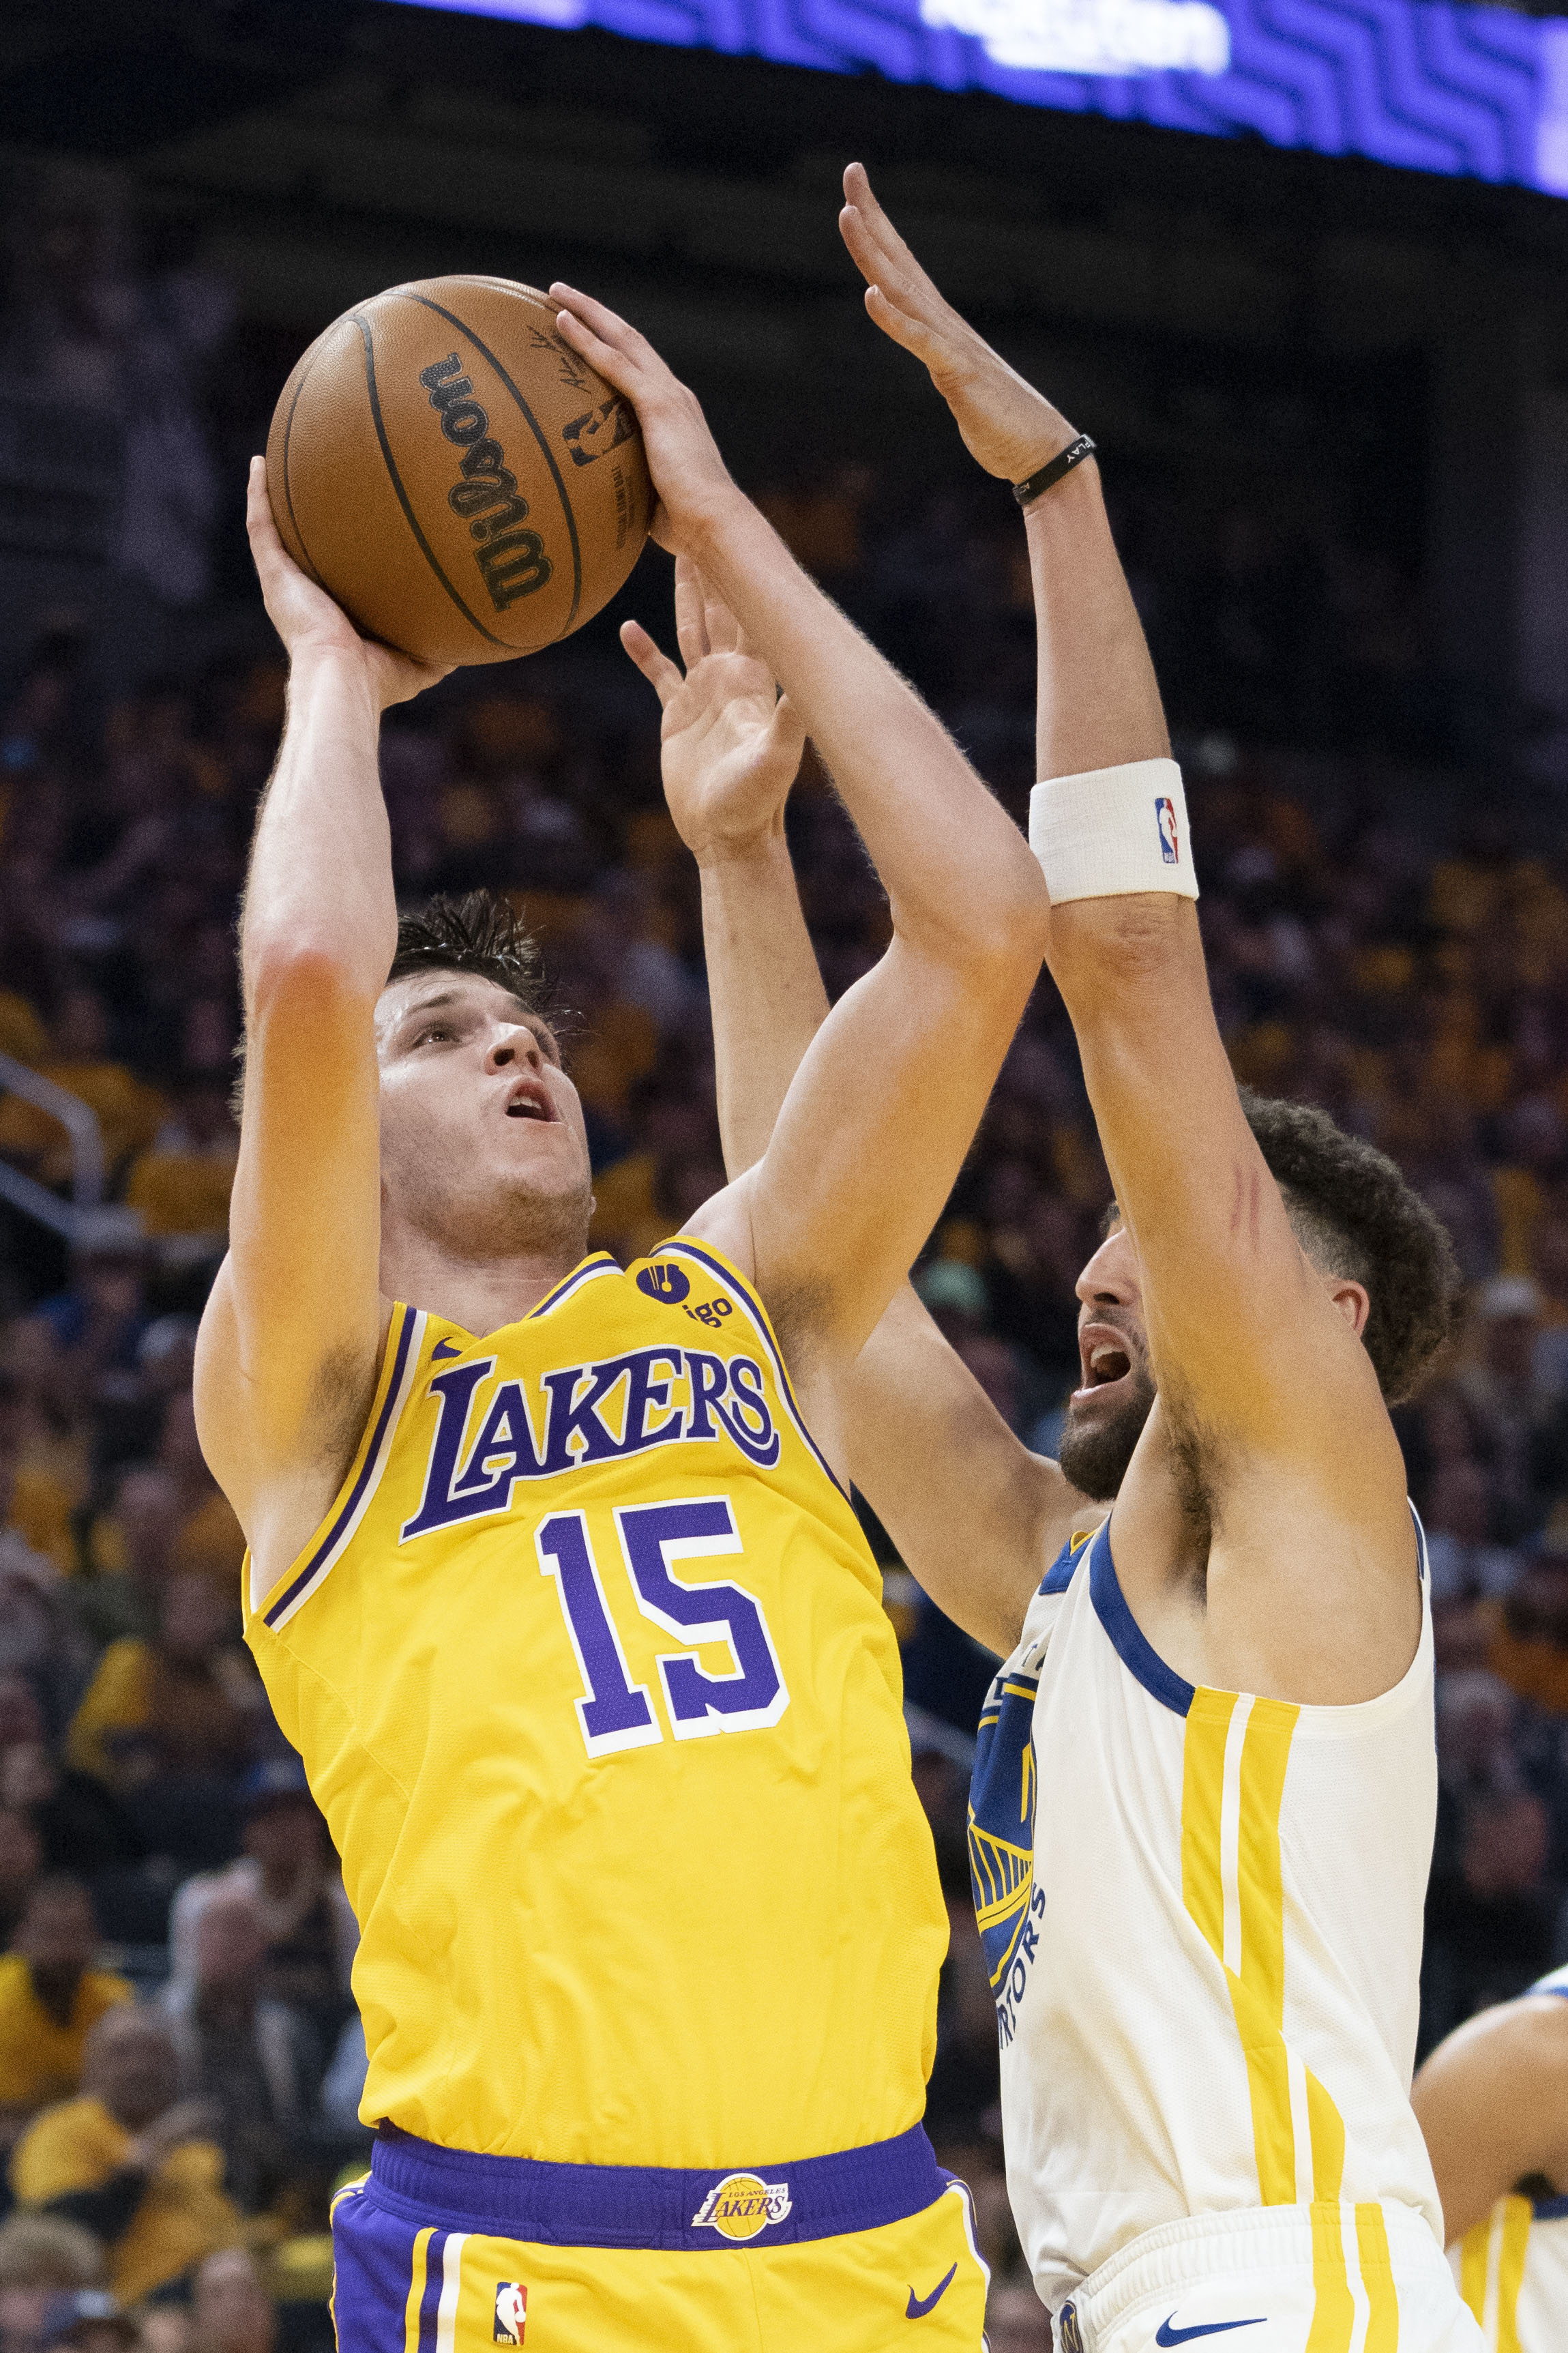 Warriors vs. Lakers Game 6: Keys for Steph Curry and Golden State